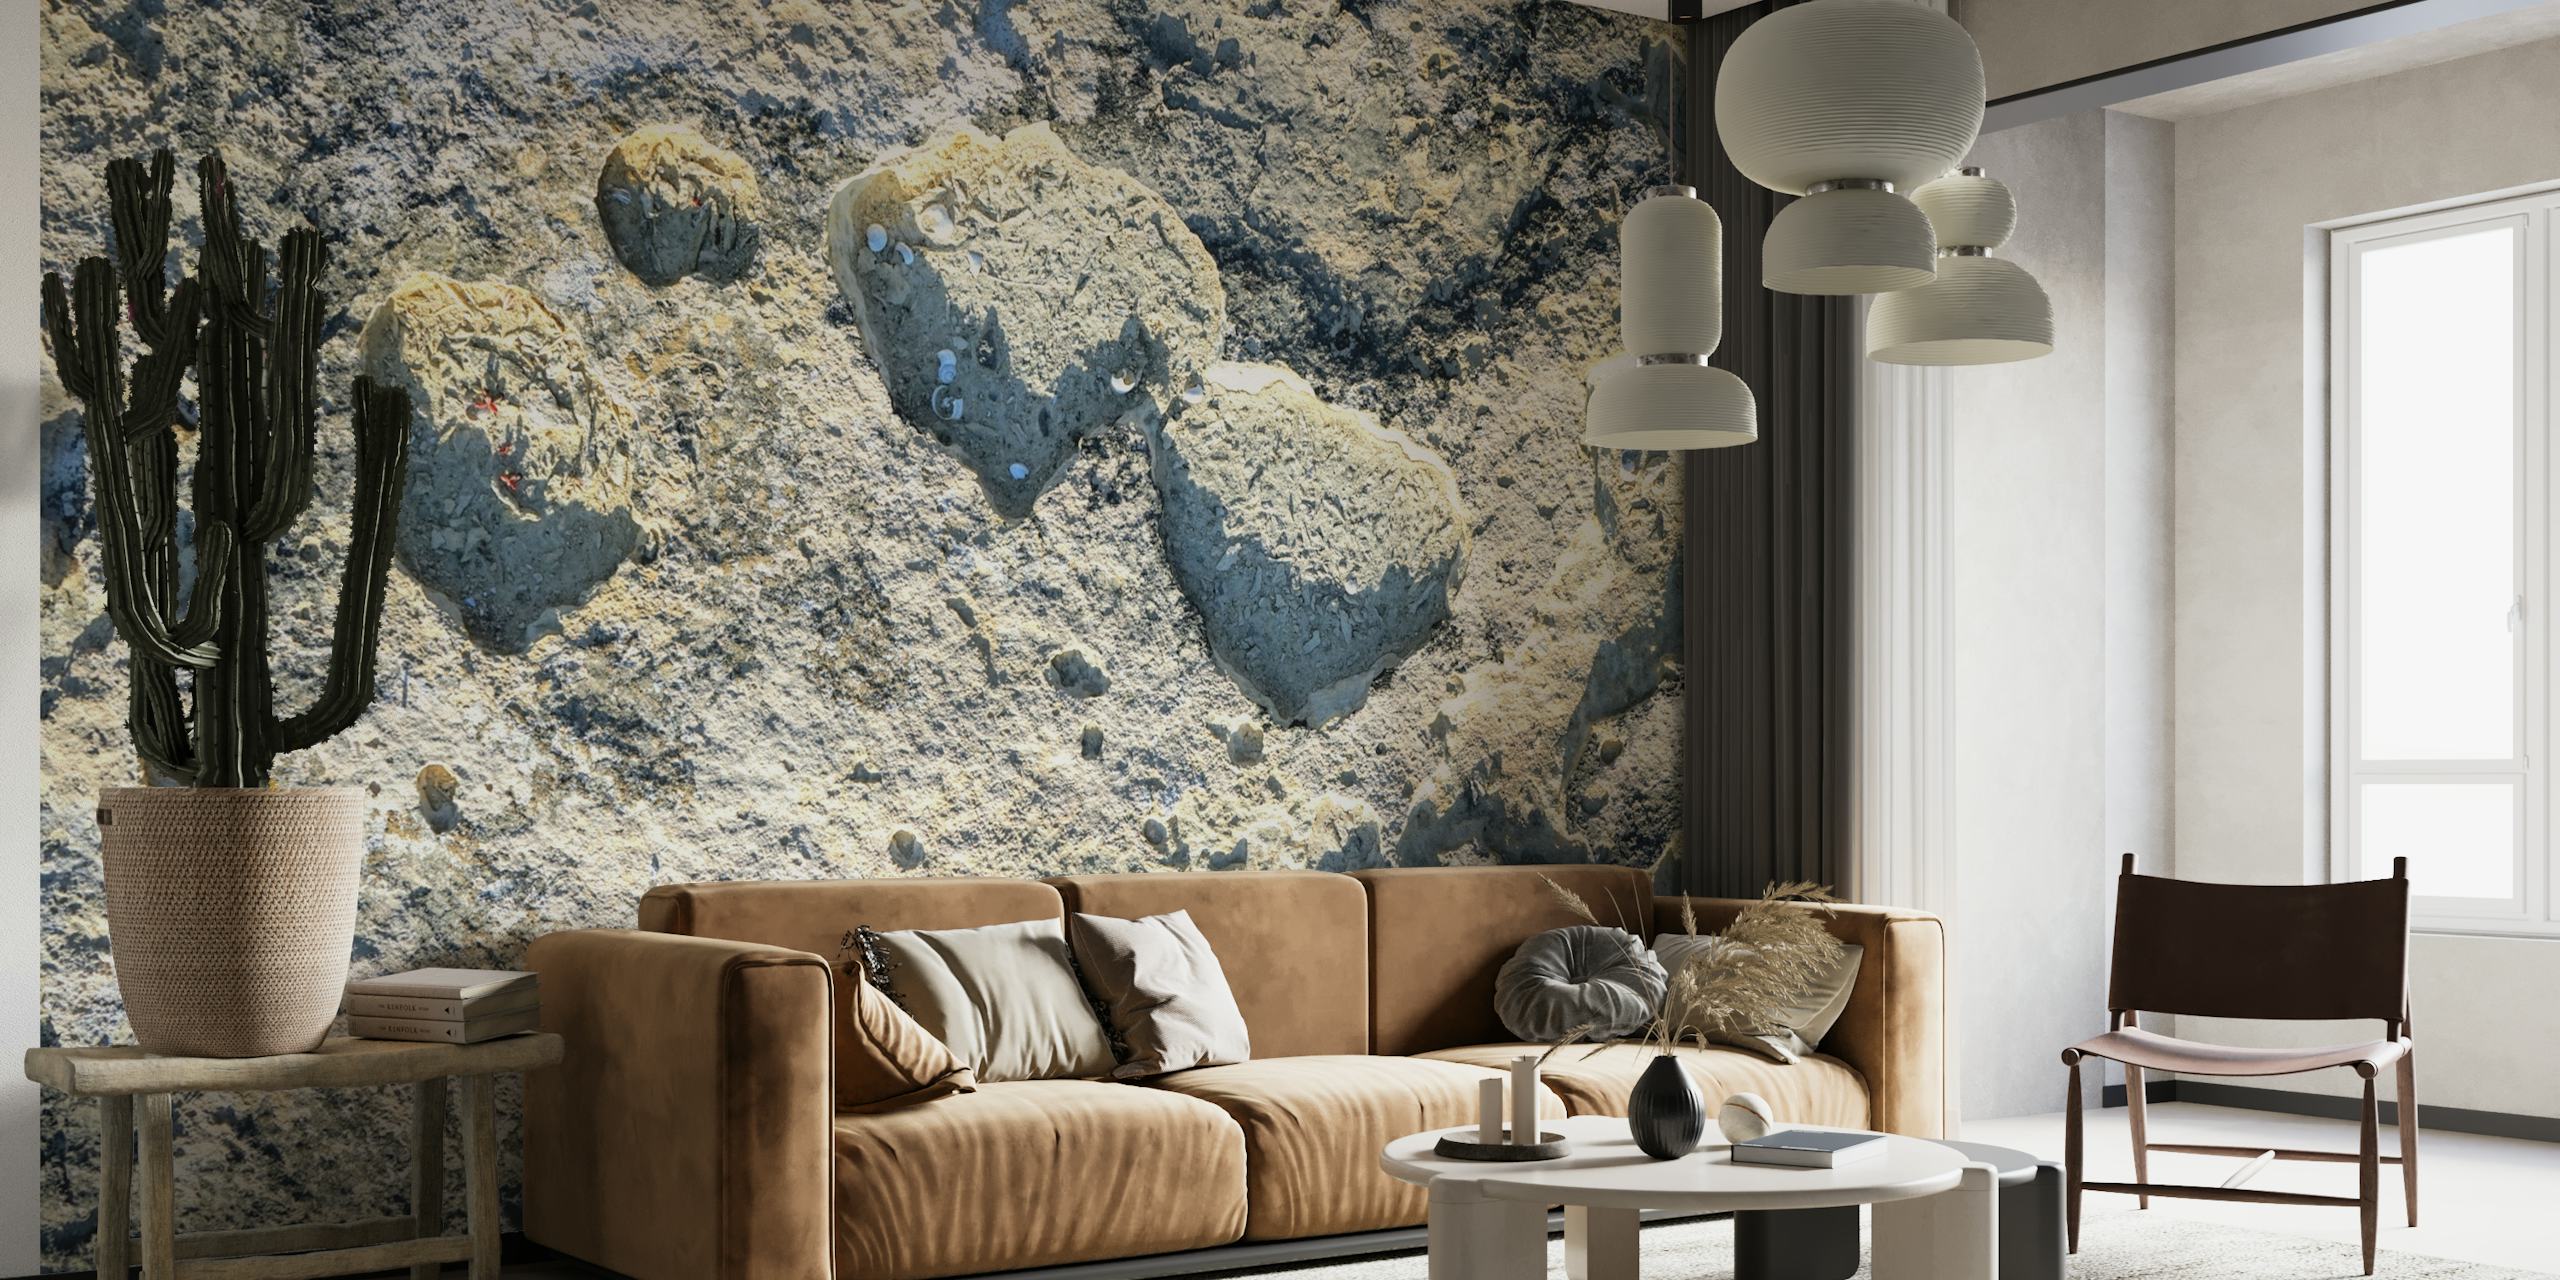 Textured sunlit stone wall mural with warm, rustic tones.